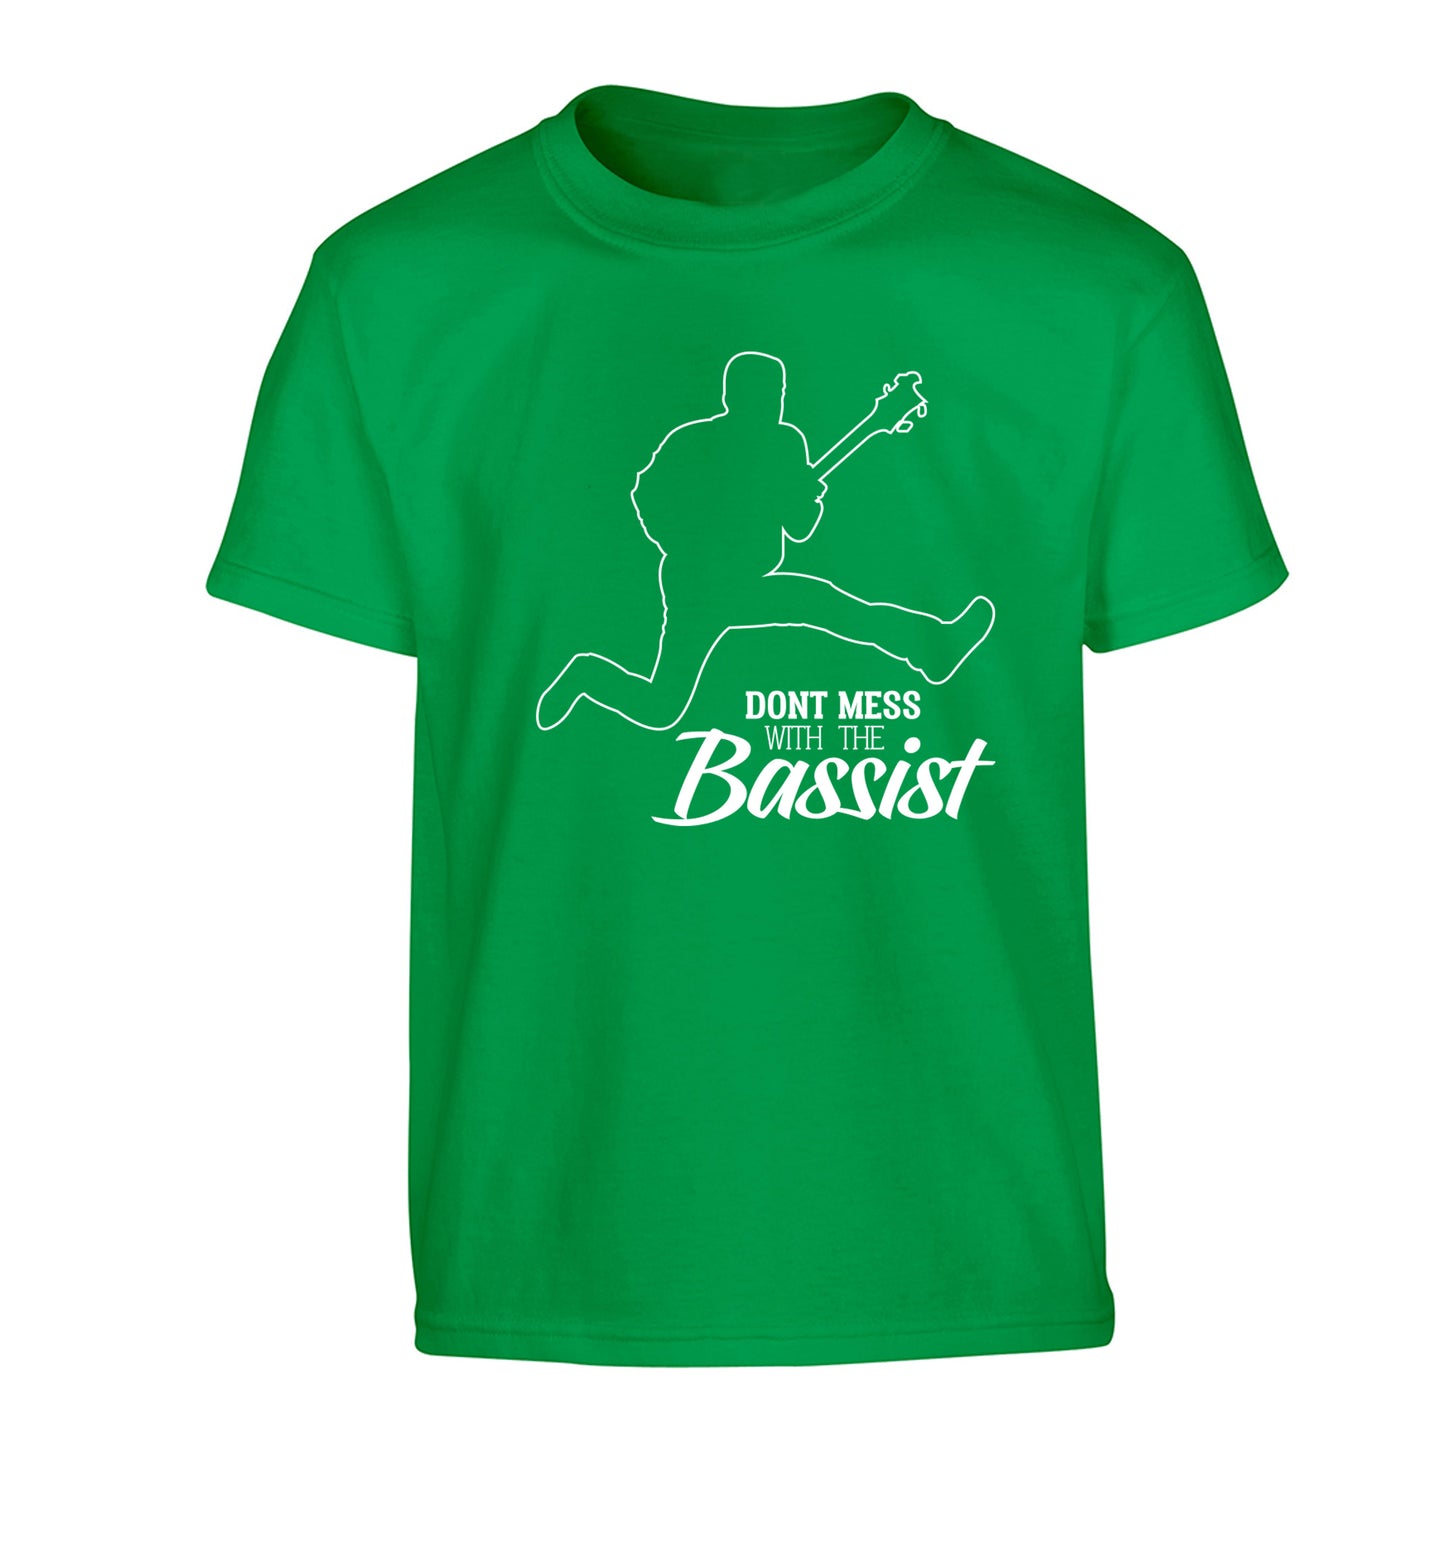 Dont mess with the bassist Children's green Tshirt 12-13 Years